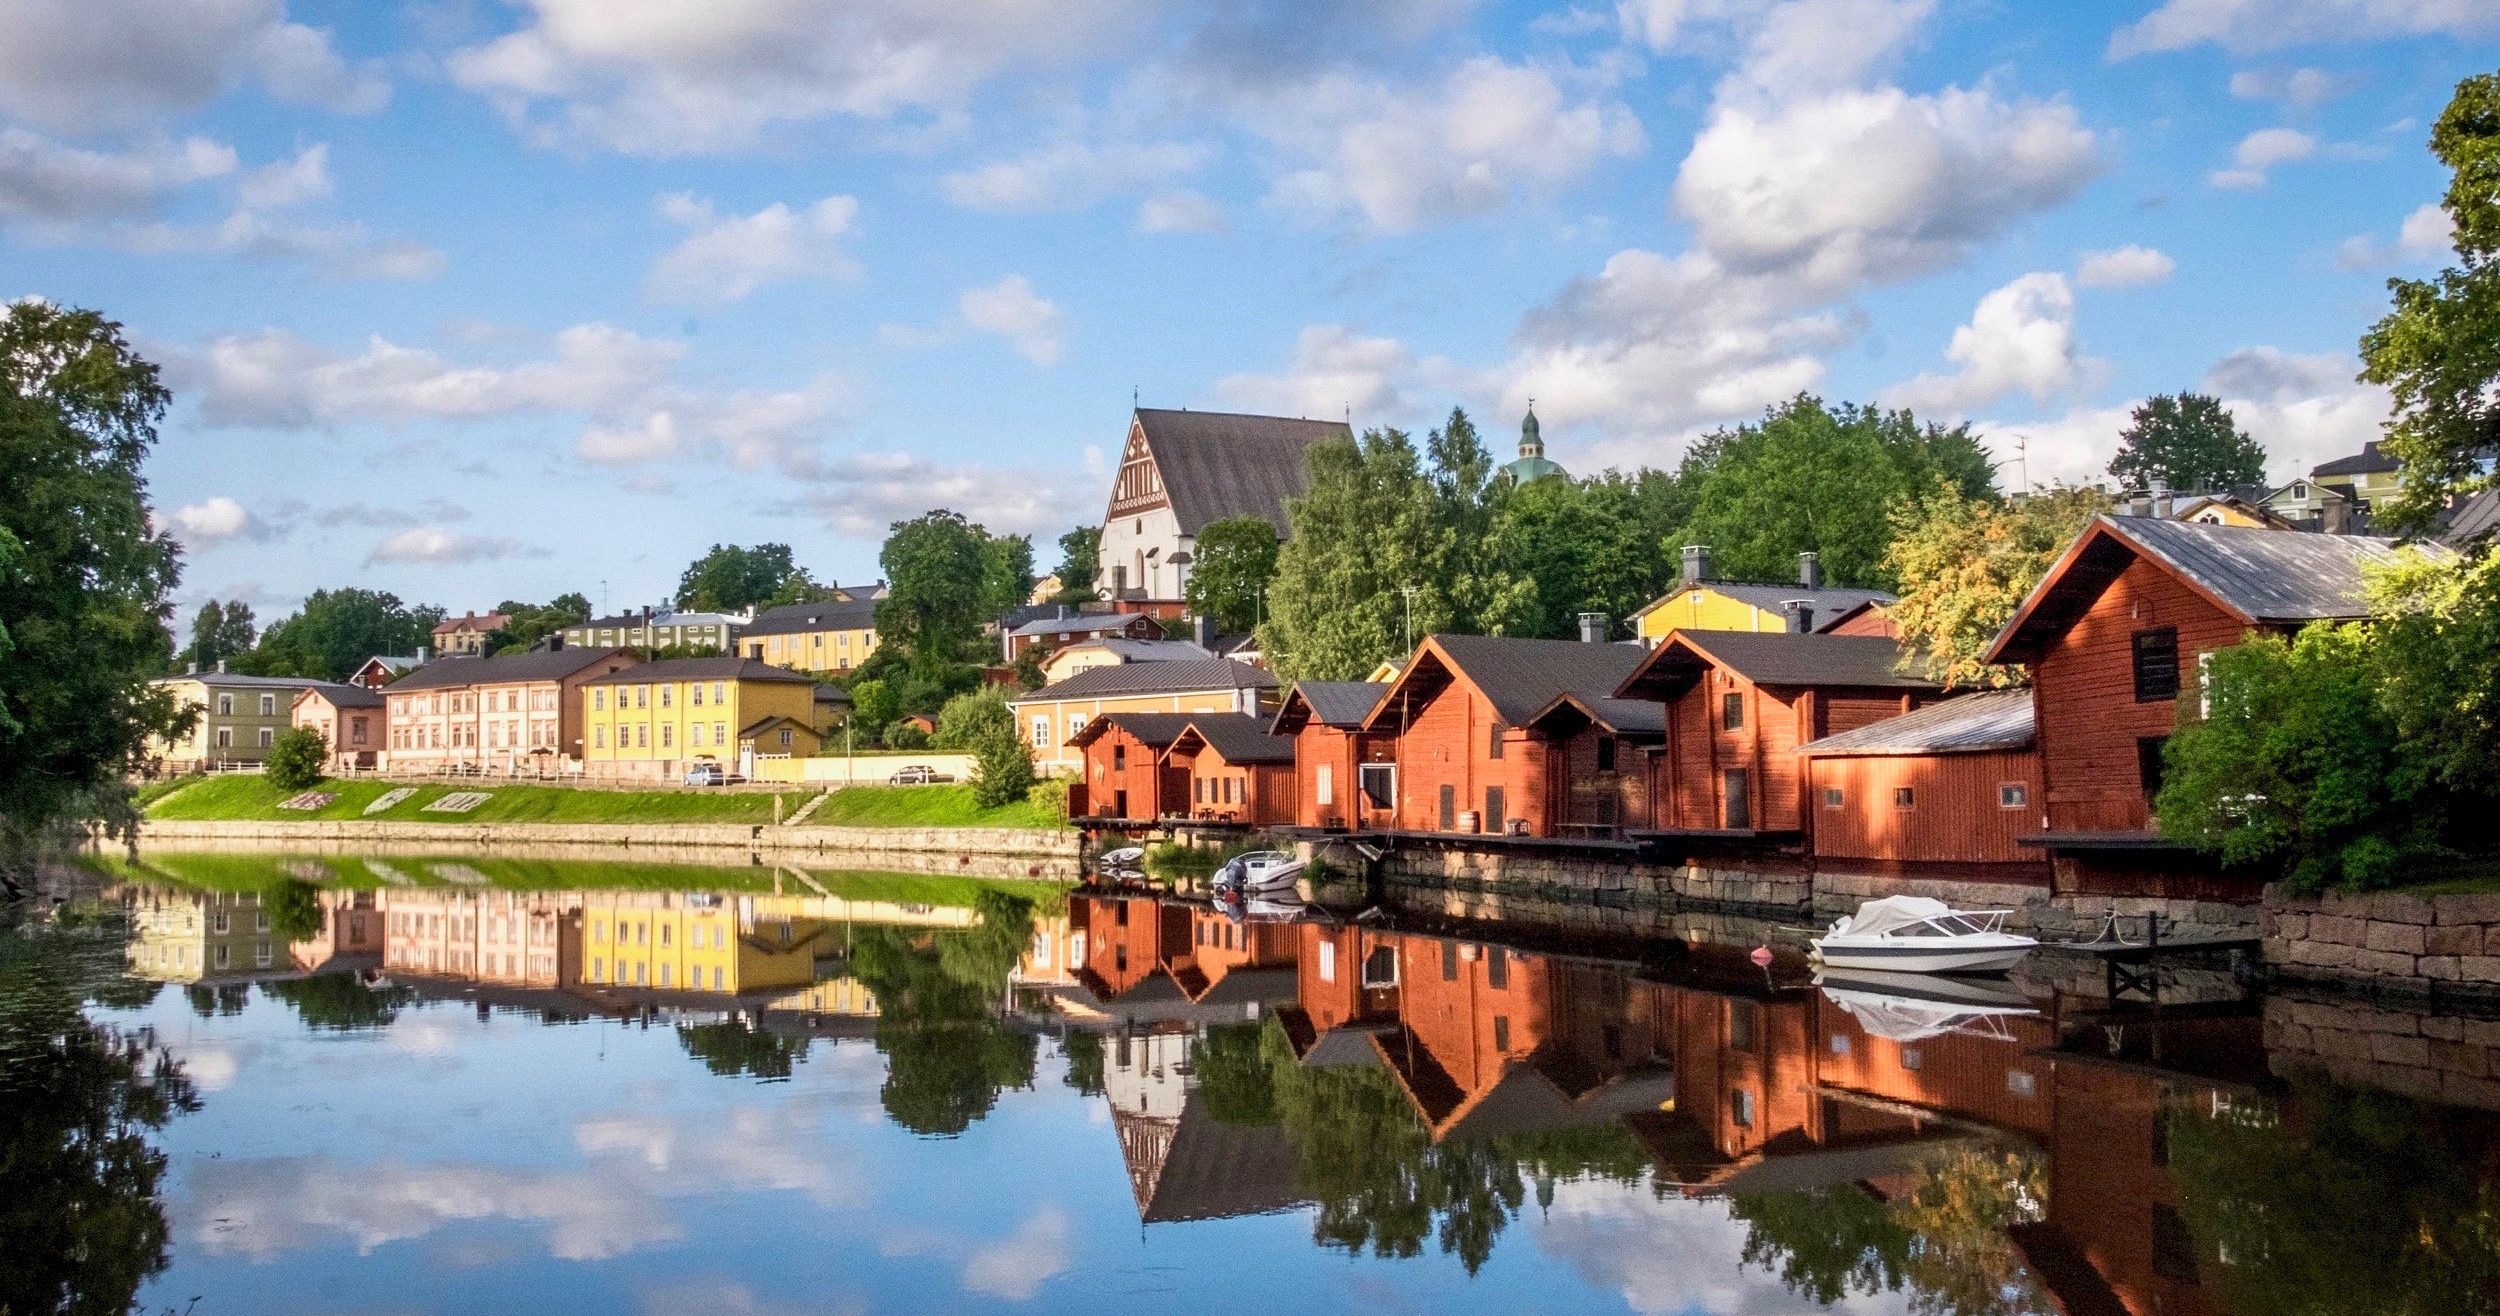 Finland Voted Happiest Country In The World (And Now You Can Visit For